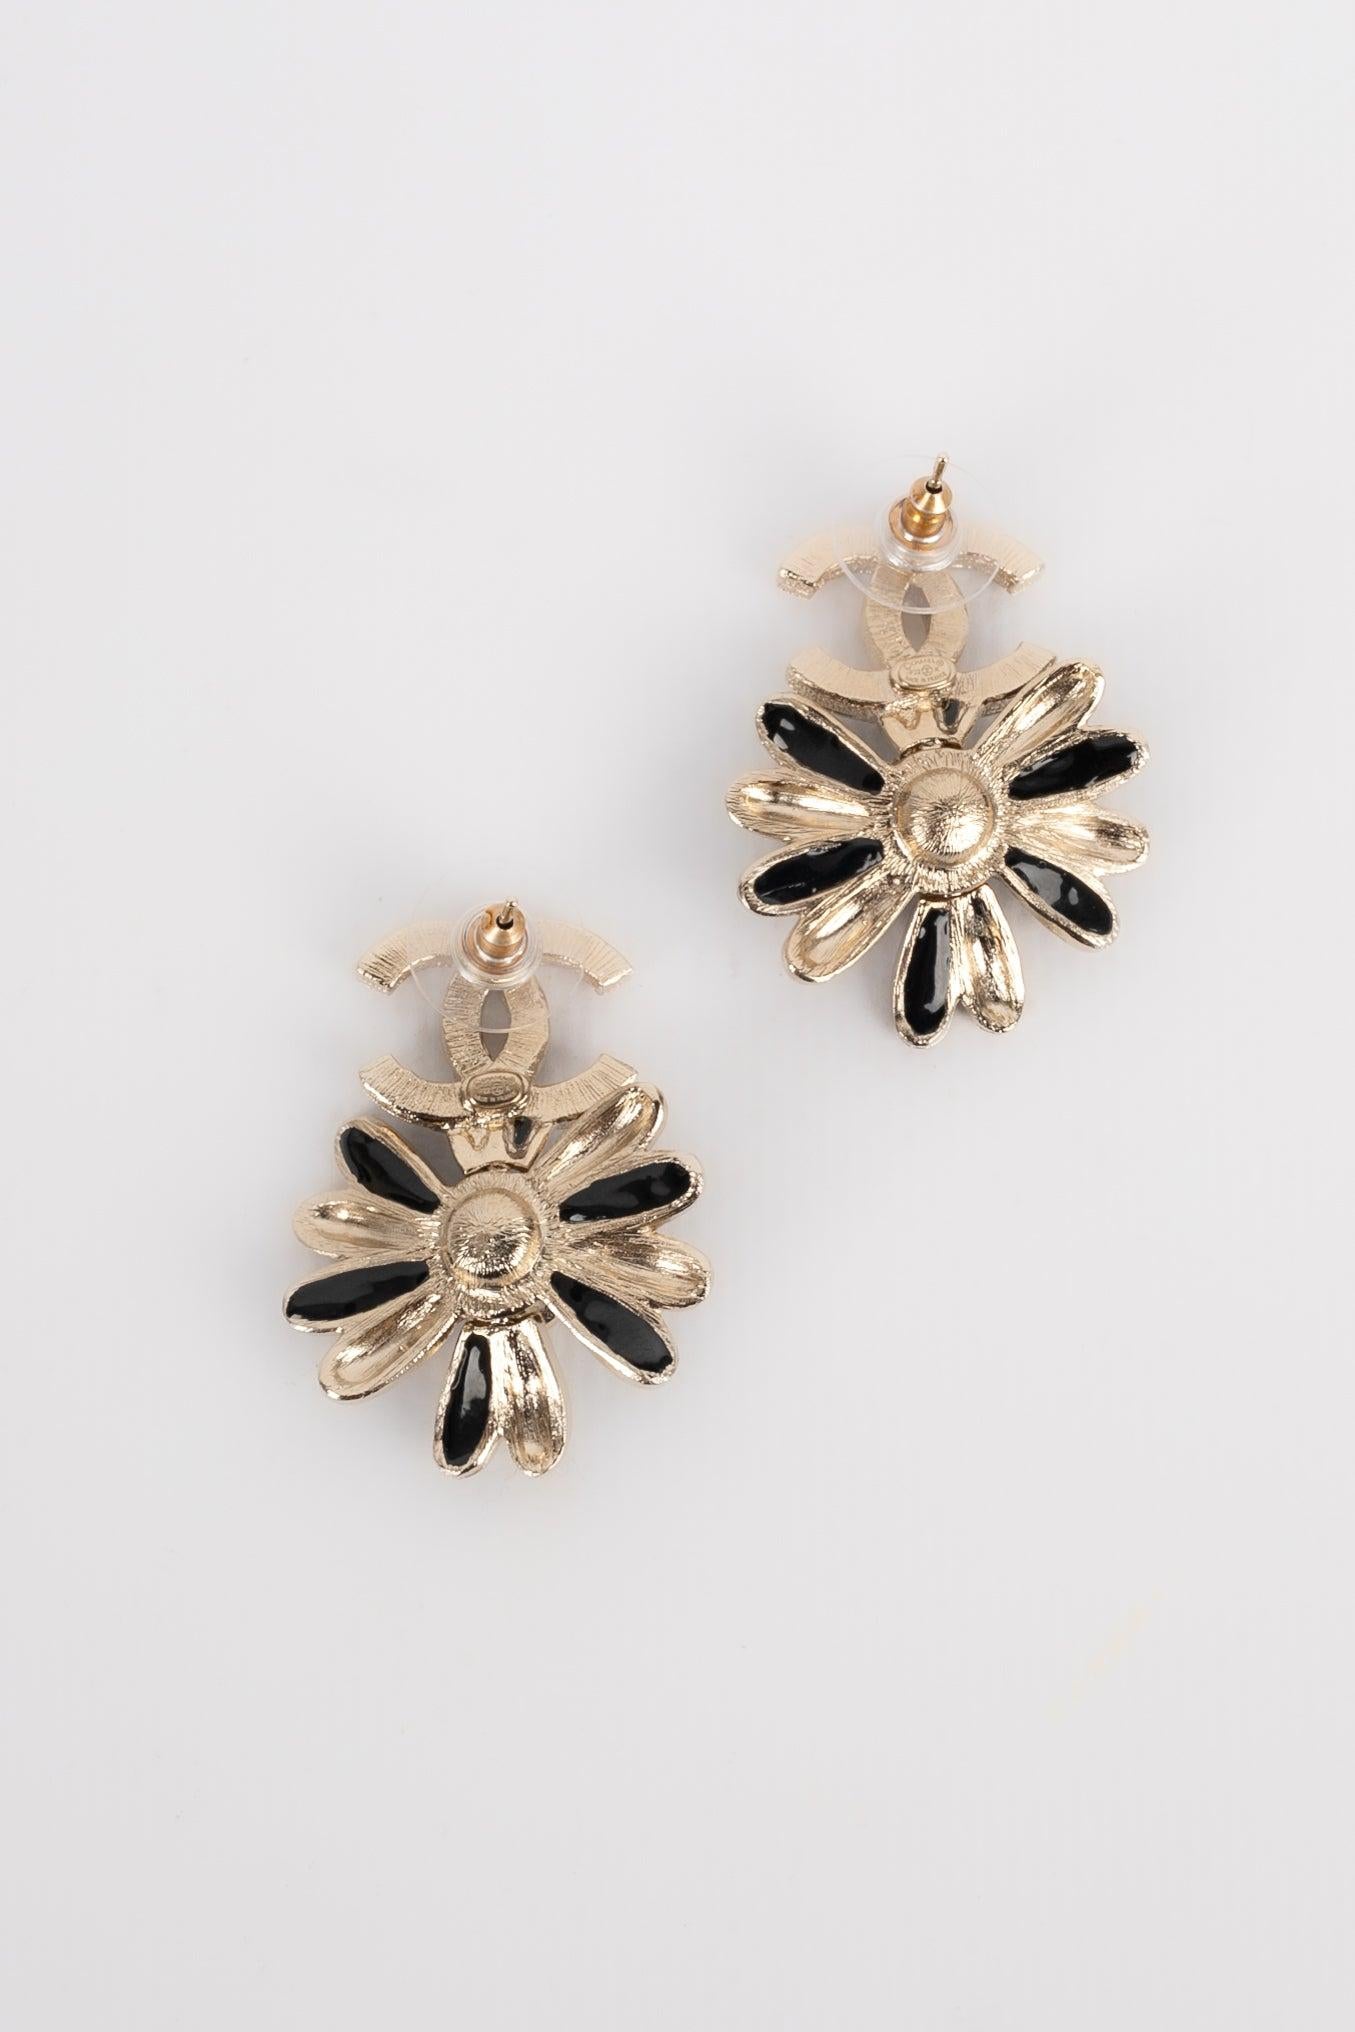 Chanel - (Made in France) Enameled silvery metal earrings representing a flower. 2022 Collection.
 
 Additional information: 
 Condition: Very good condition
 Dimensions: 3.5 cm x 2.5 cm
 Period: 21st Century
 
 Seller Reference: BOB144
